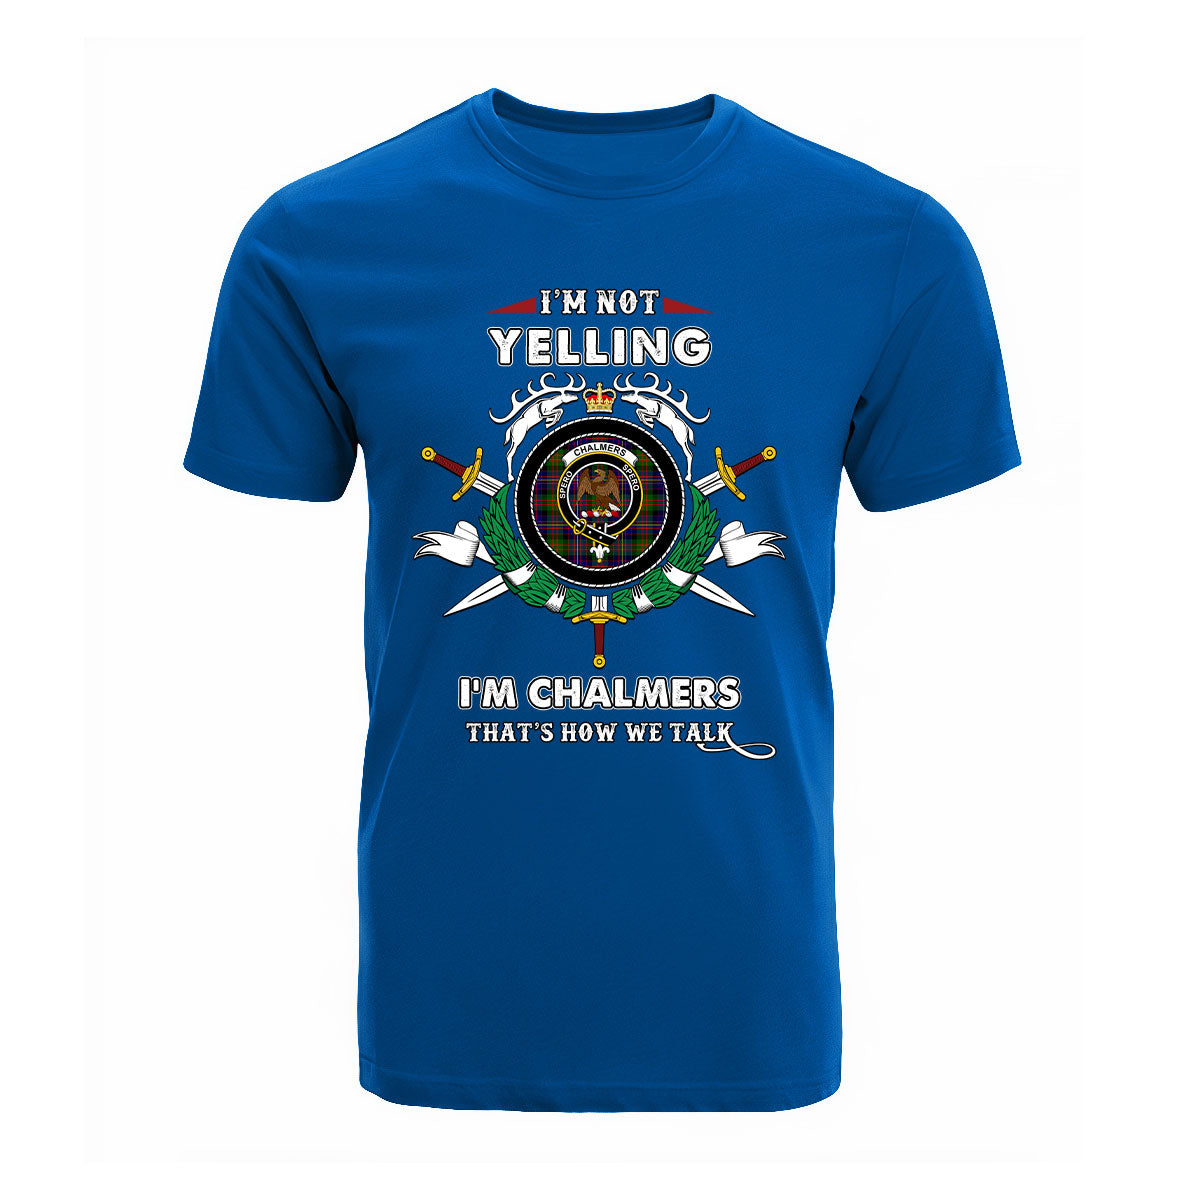 Chalmers Tartan Crest T-shirt - I'm not yelling style